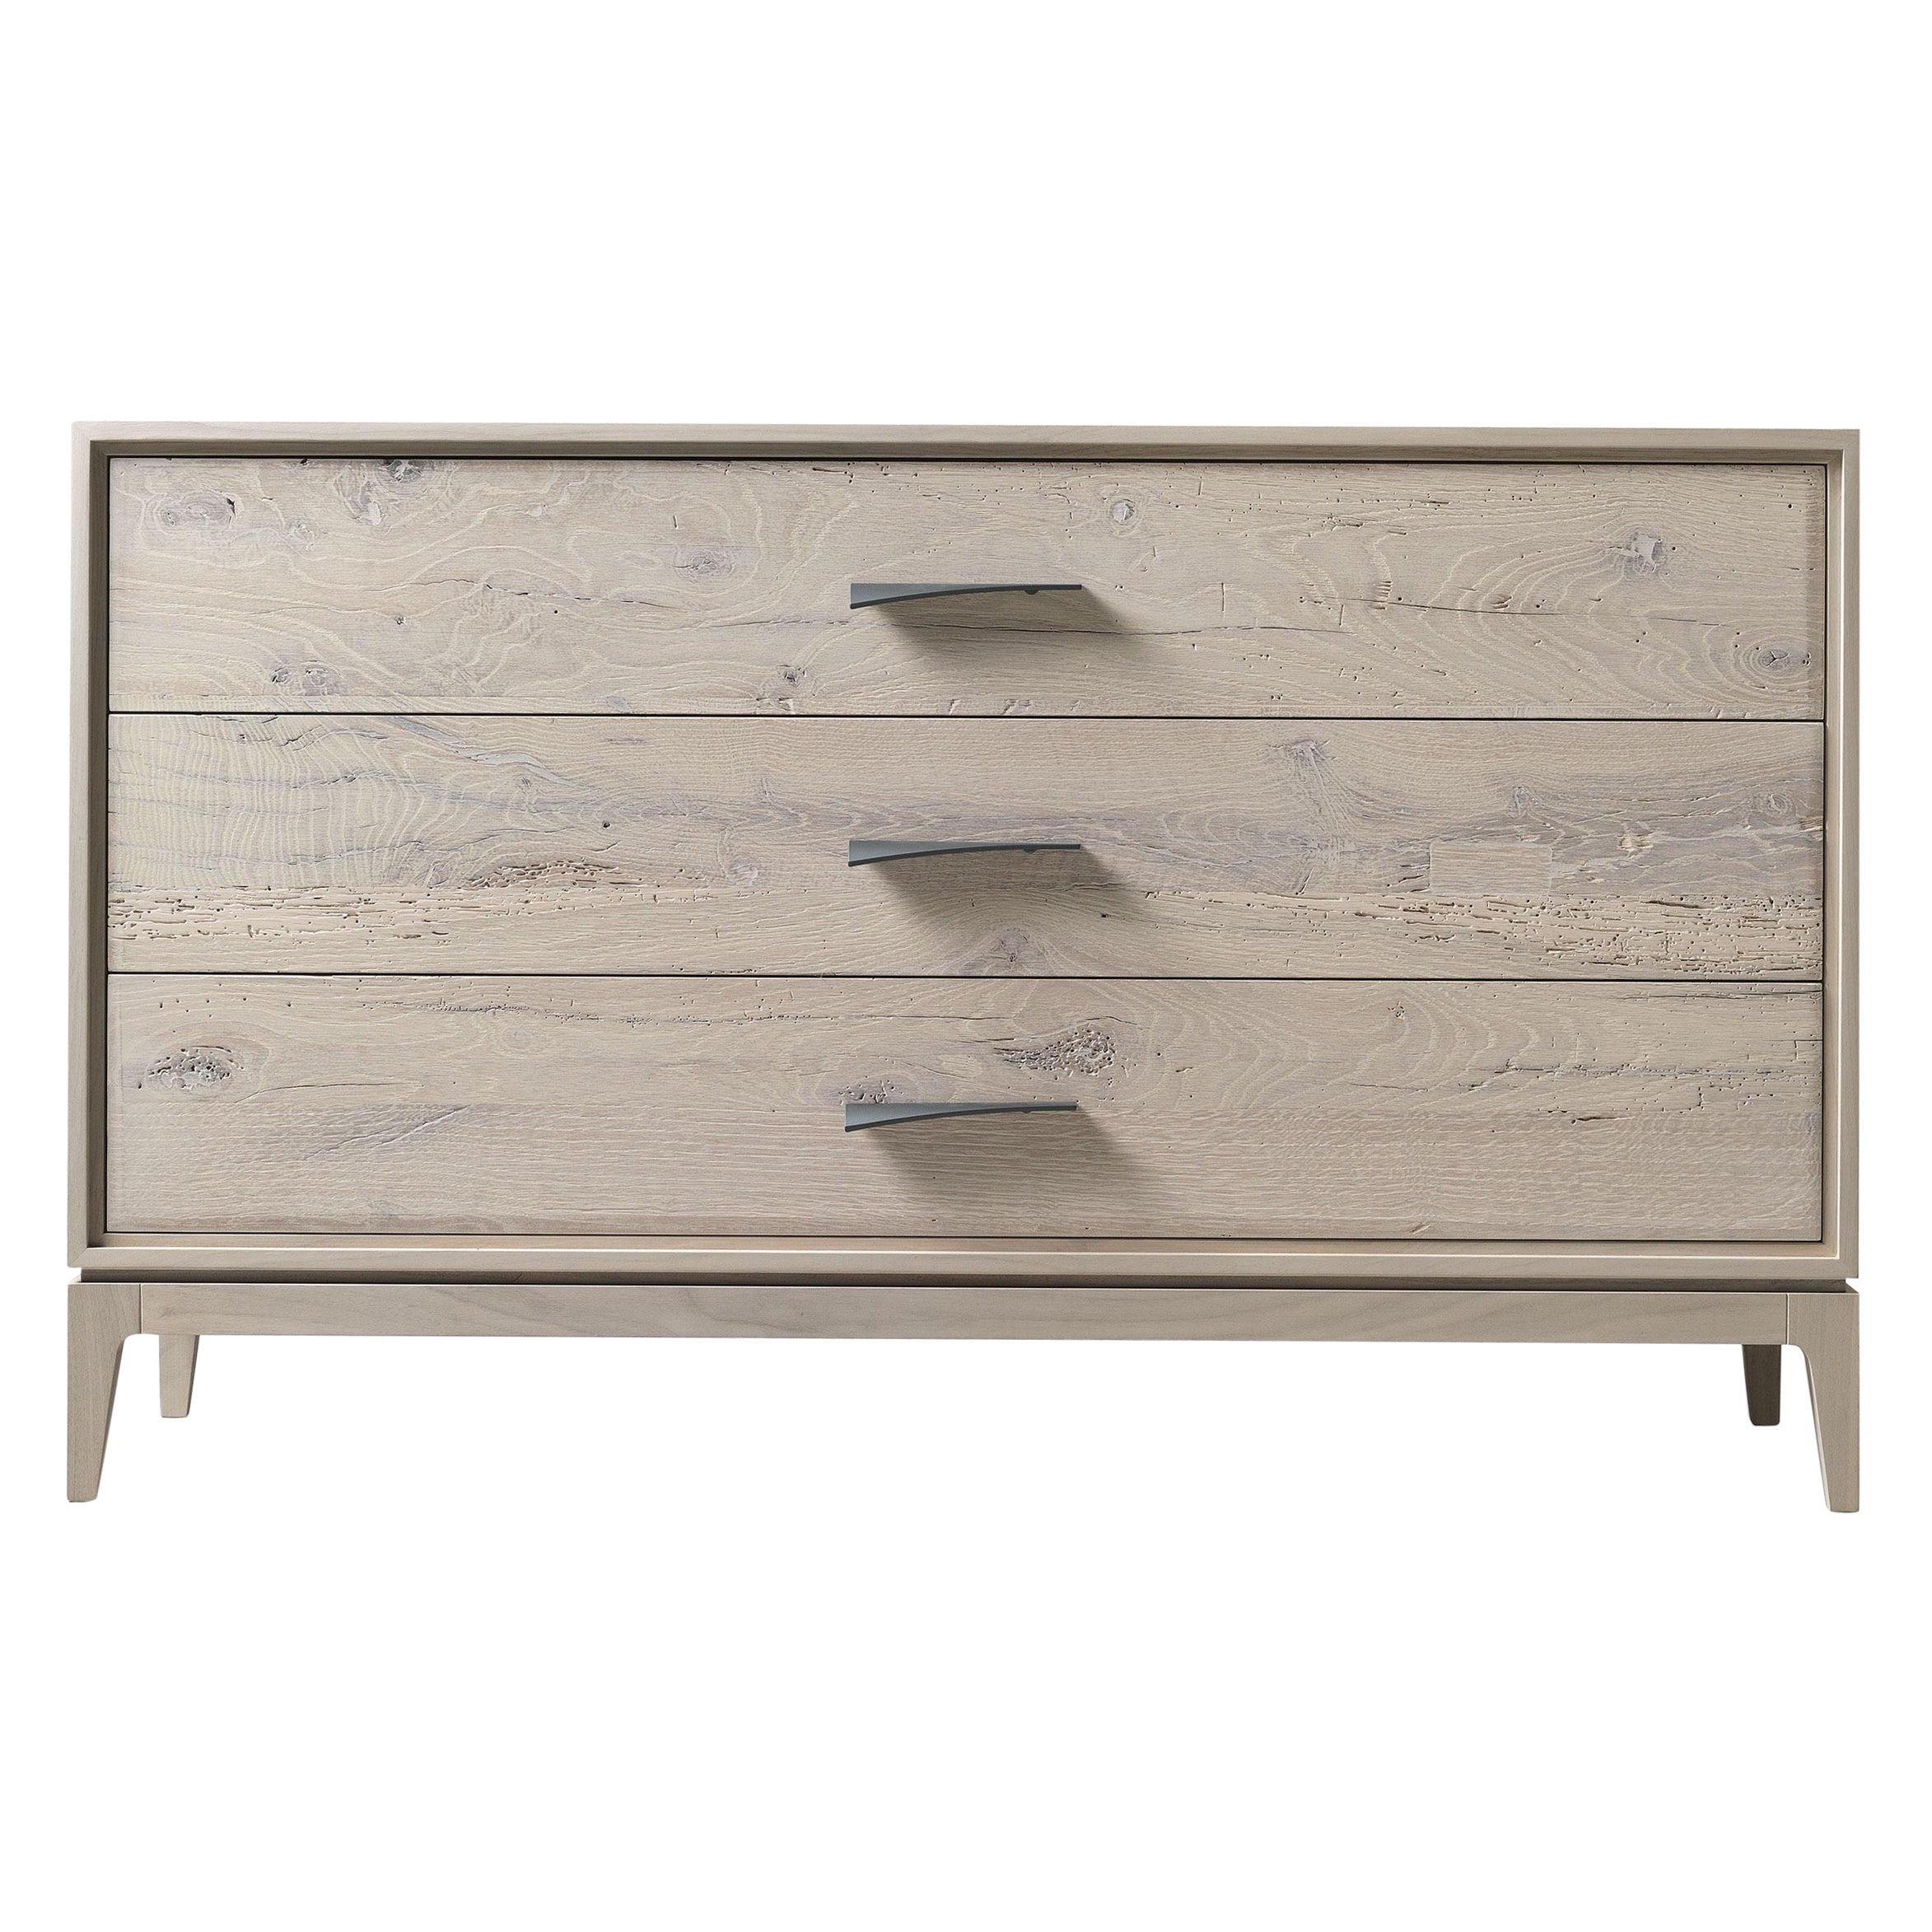 Velo Solid Wood Dresser, Walnut in Hand-Made Natural Grey Finish, Contemporary For Sale